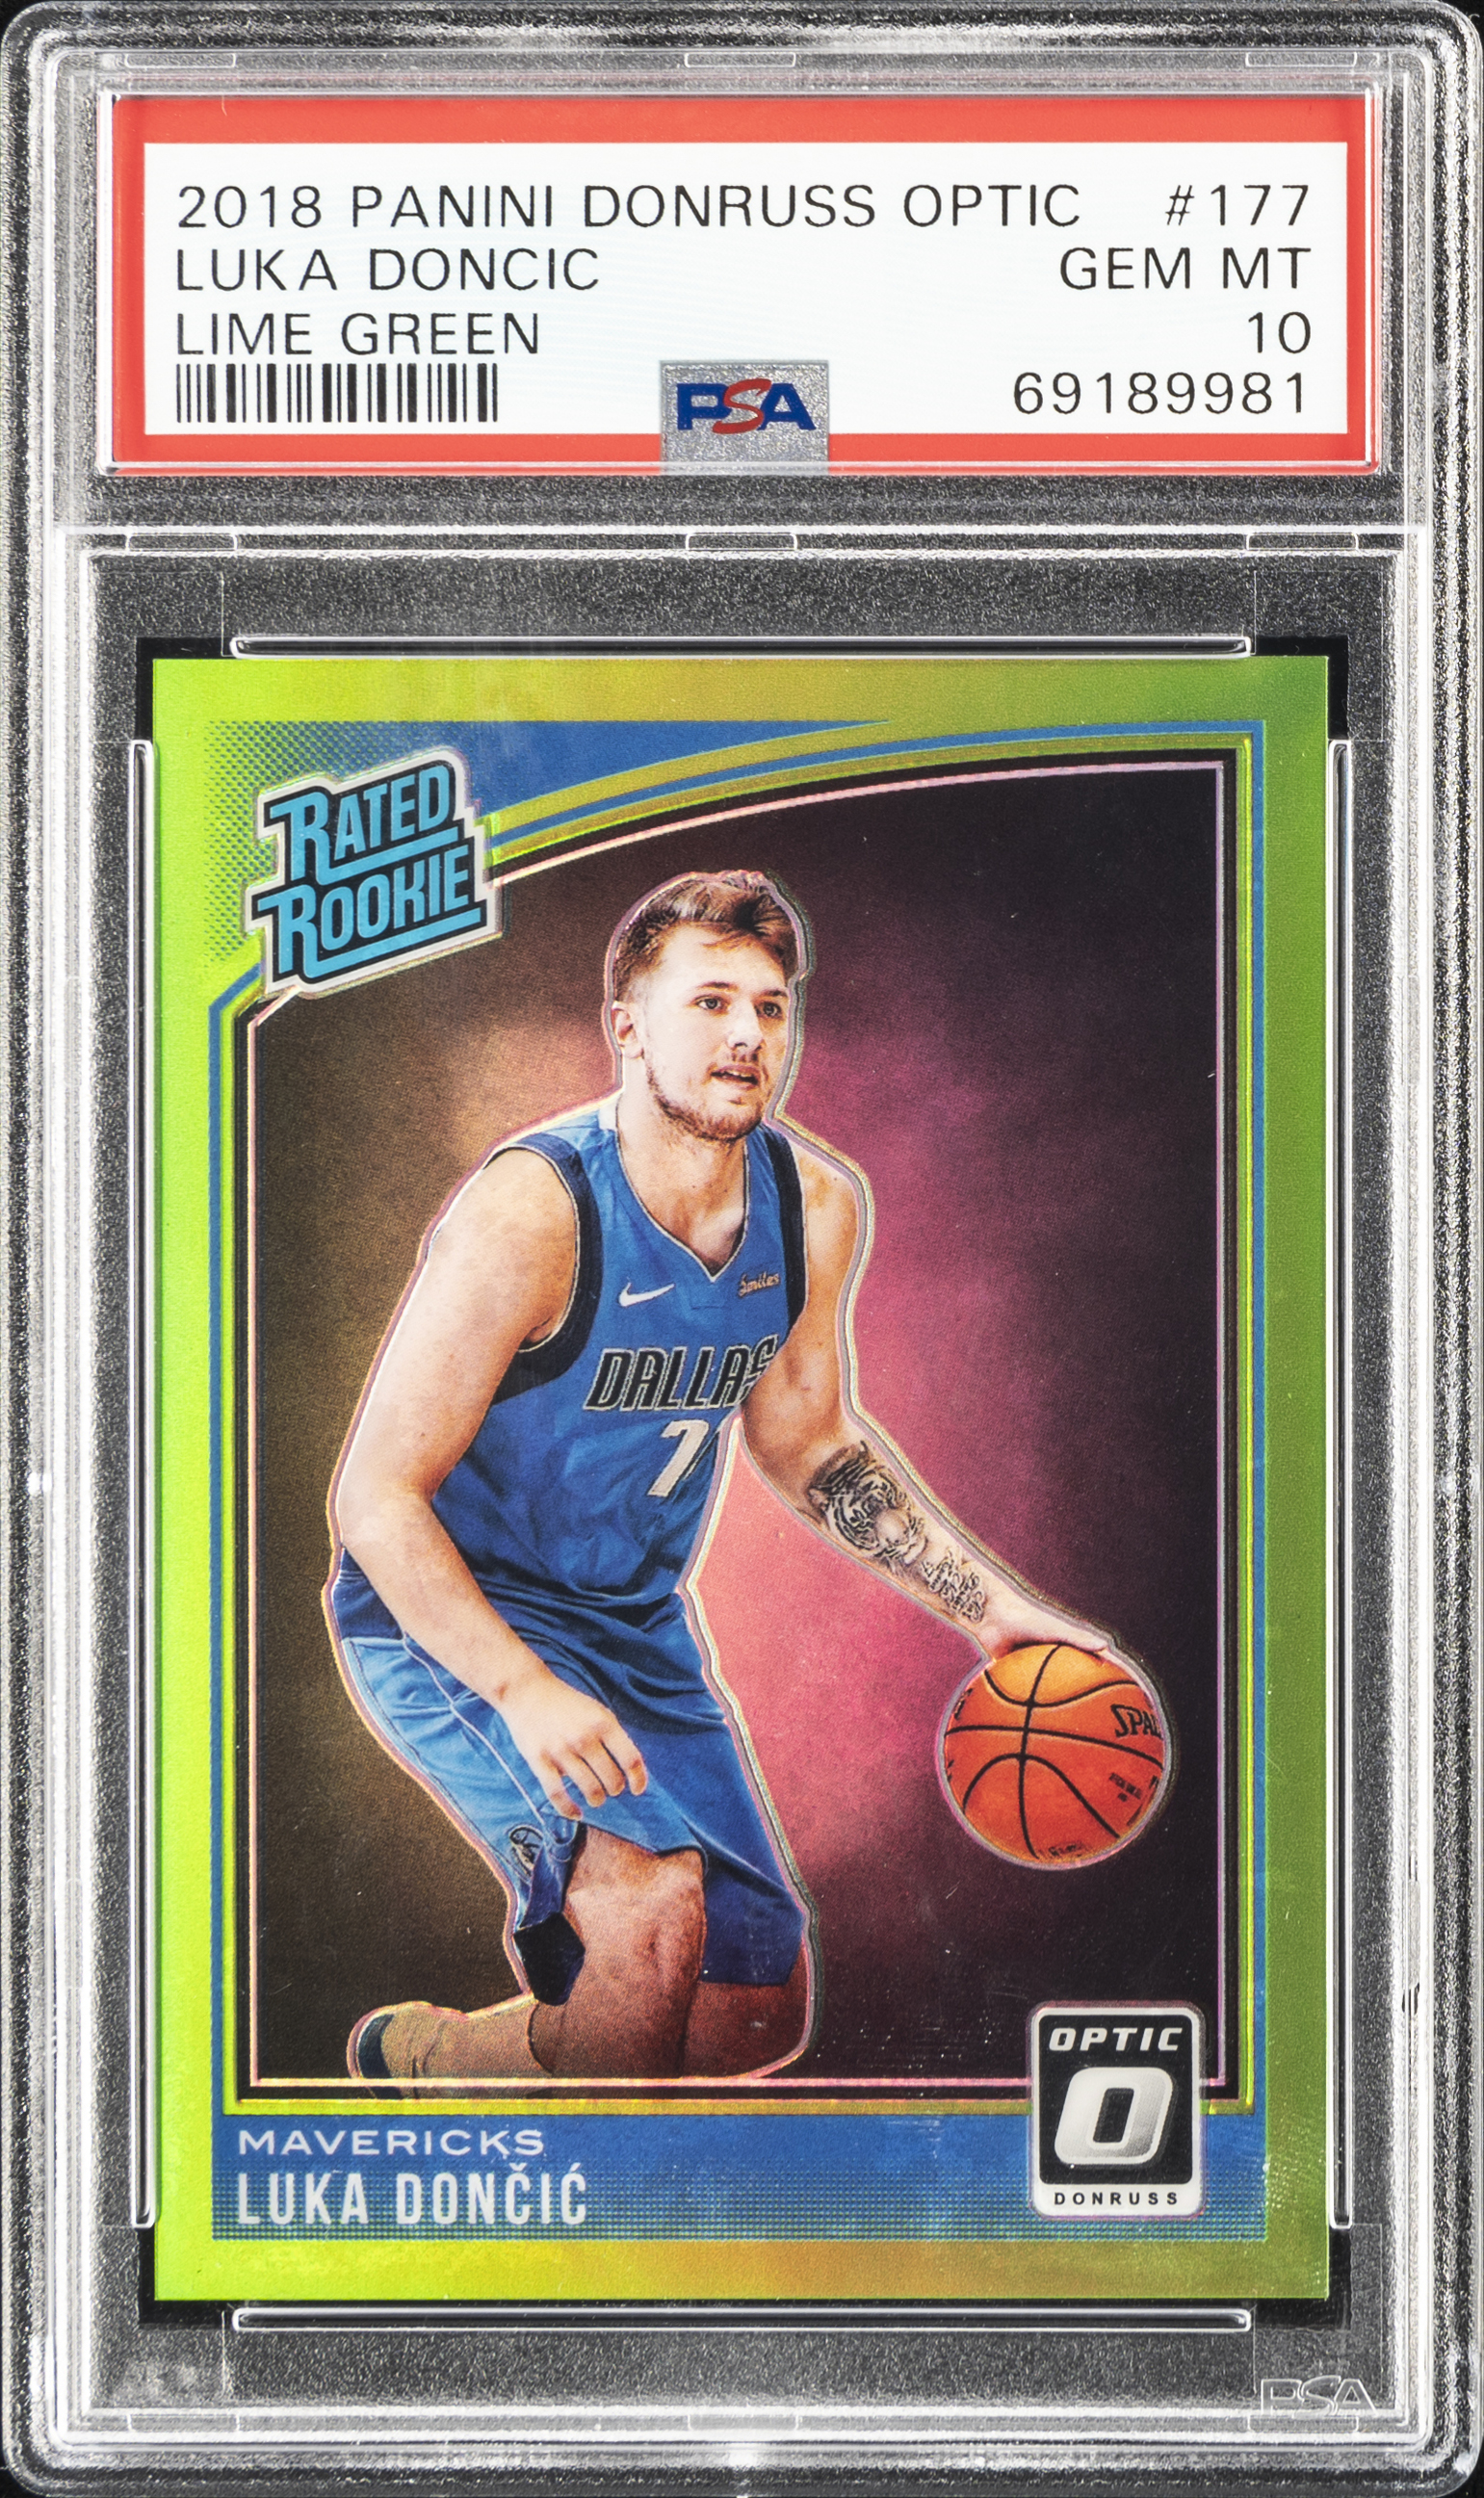 2018-19 Panini Donruss Optic Lime Green Rated Rookie #177 Luka Doncic Rookie Card (#049/149) – PSA GEM MT 10